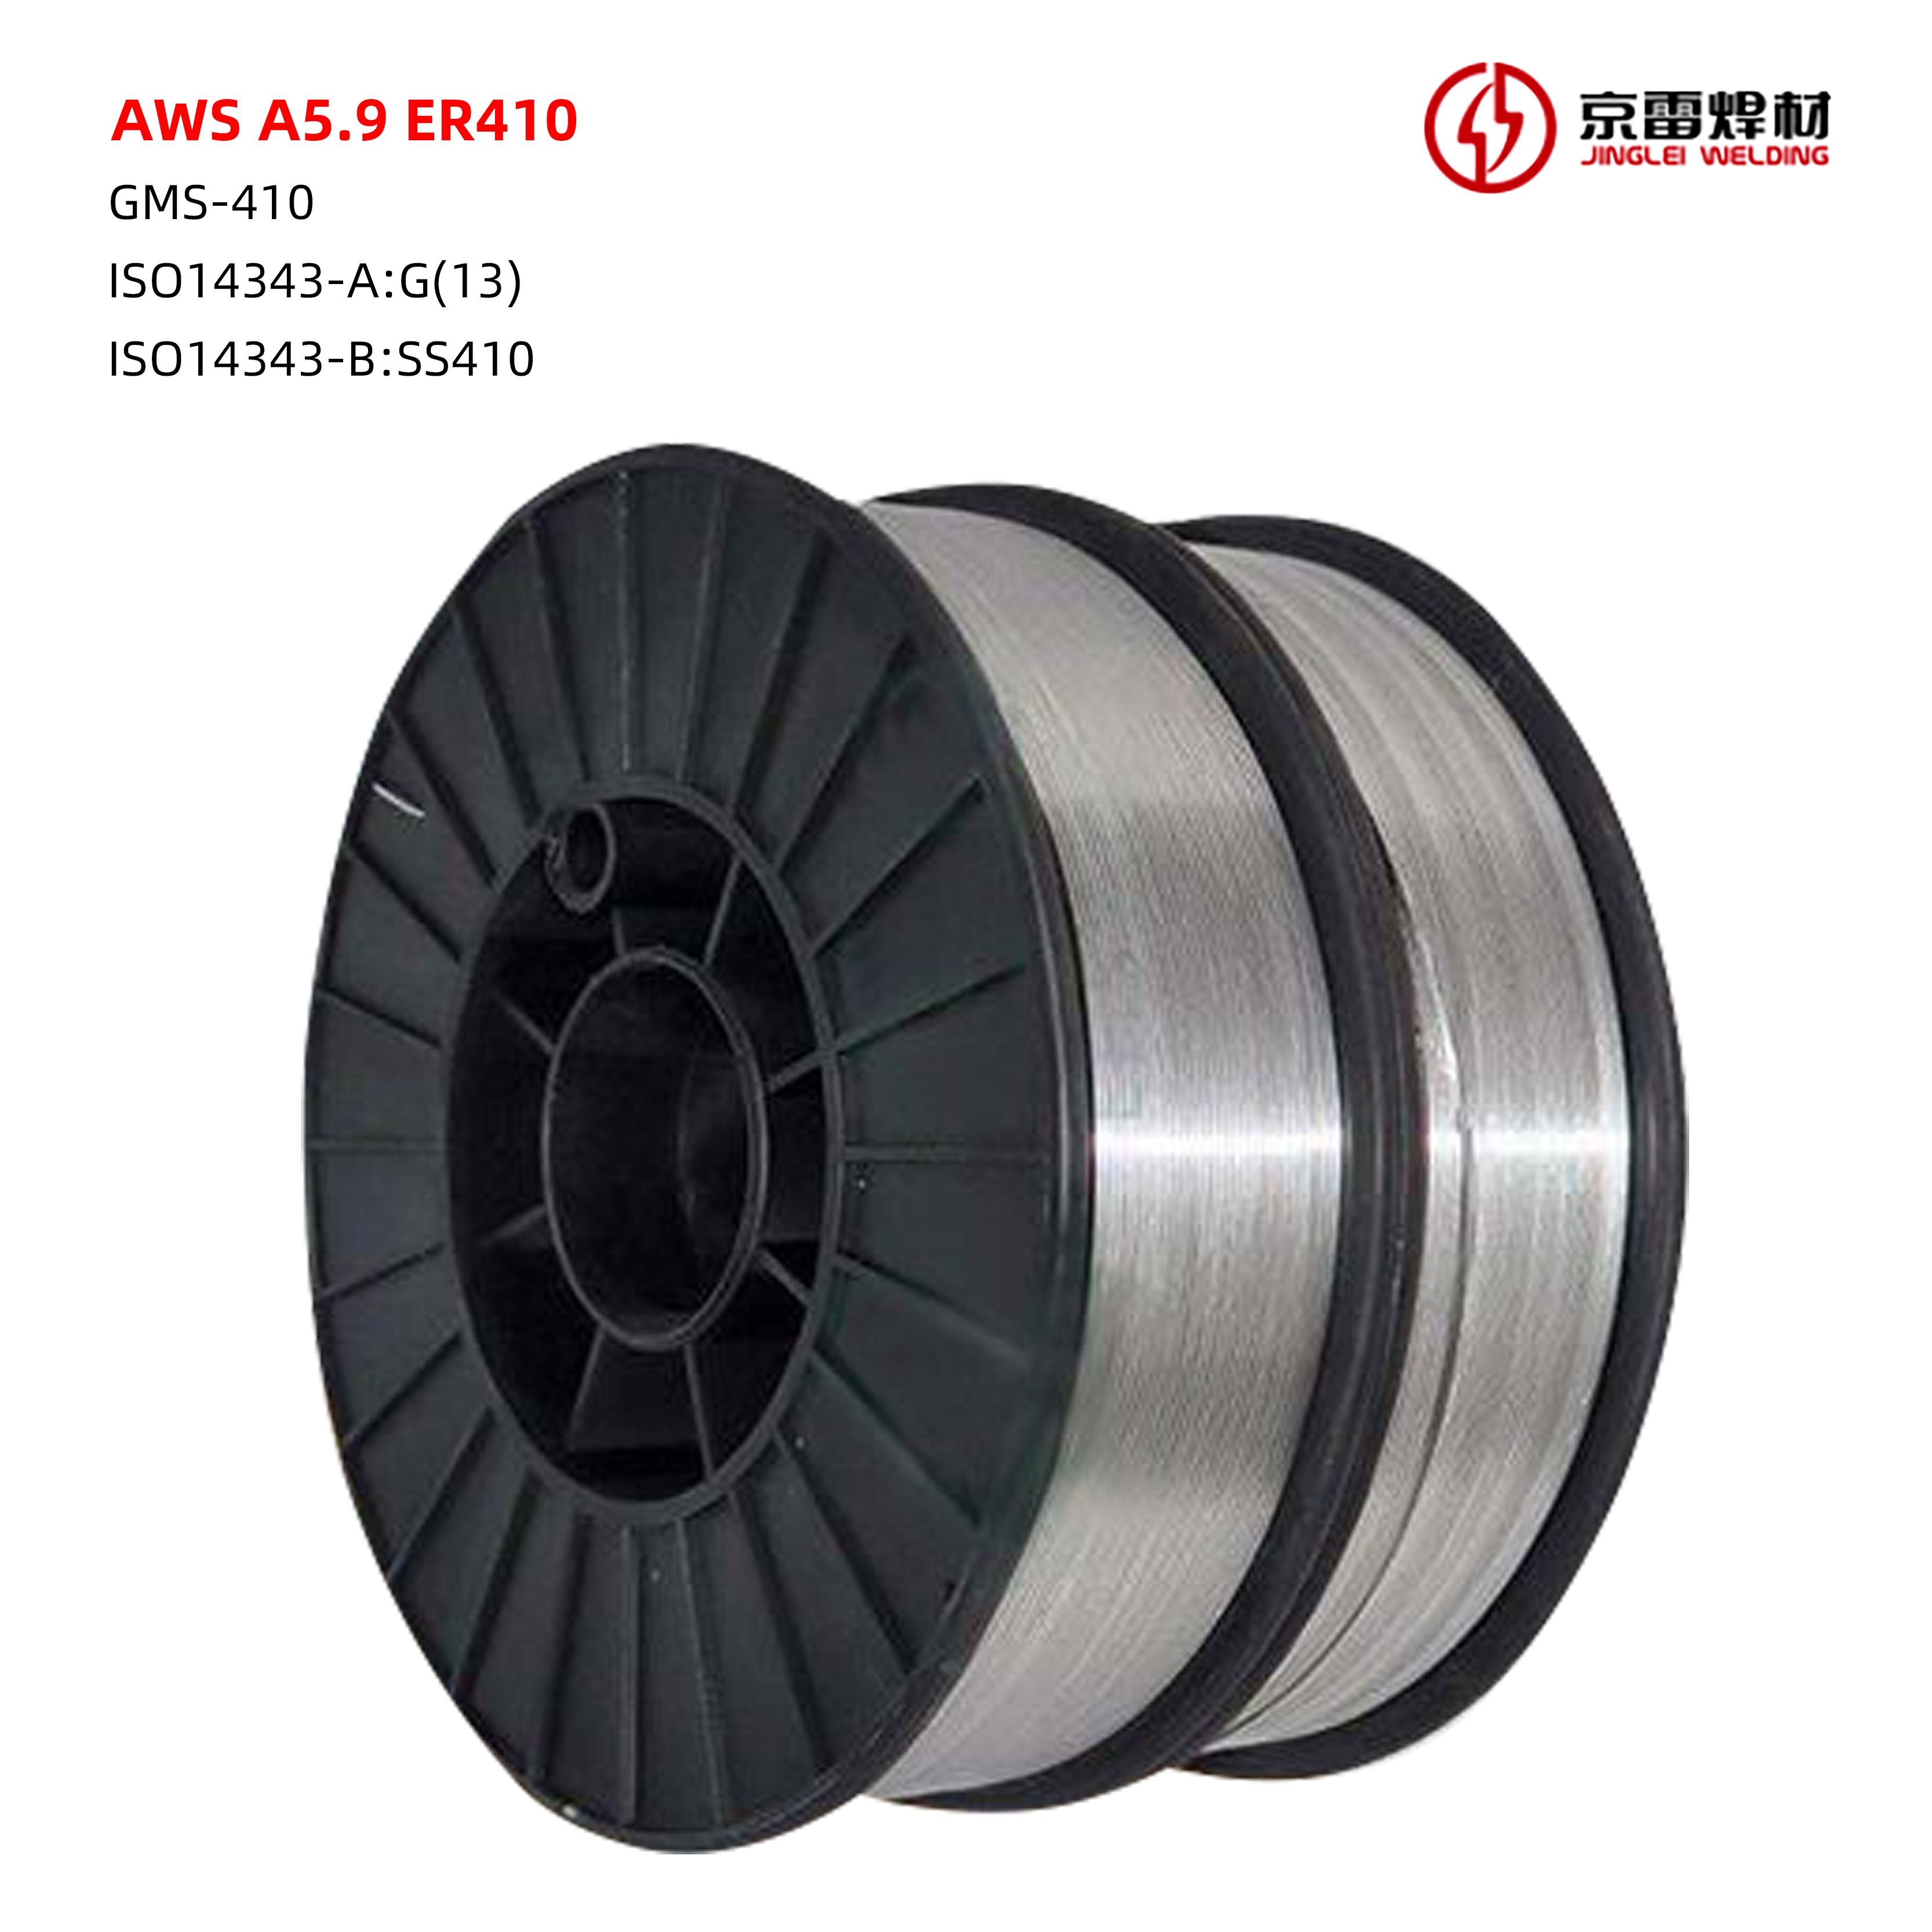 MIG Welding Wire For Stainless Steel ER410 GXHY methanol dehydration tower electrode